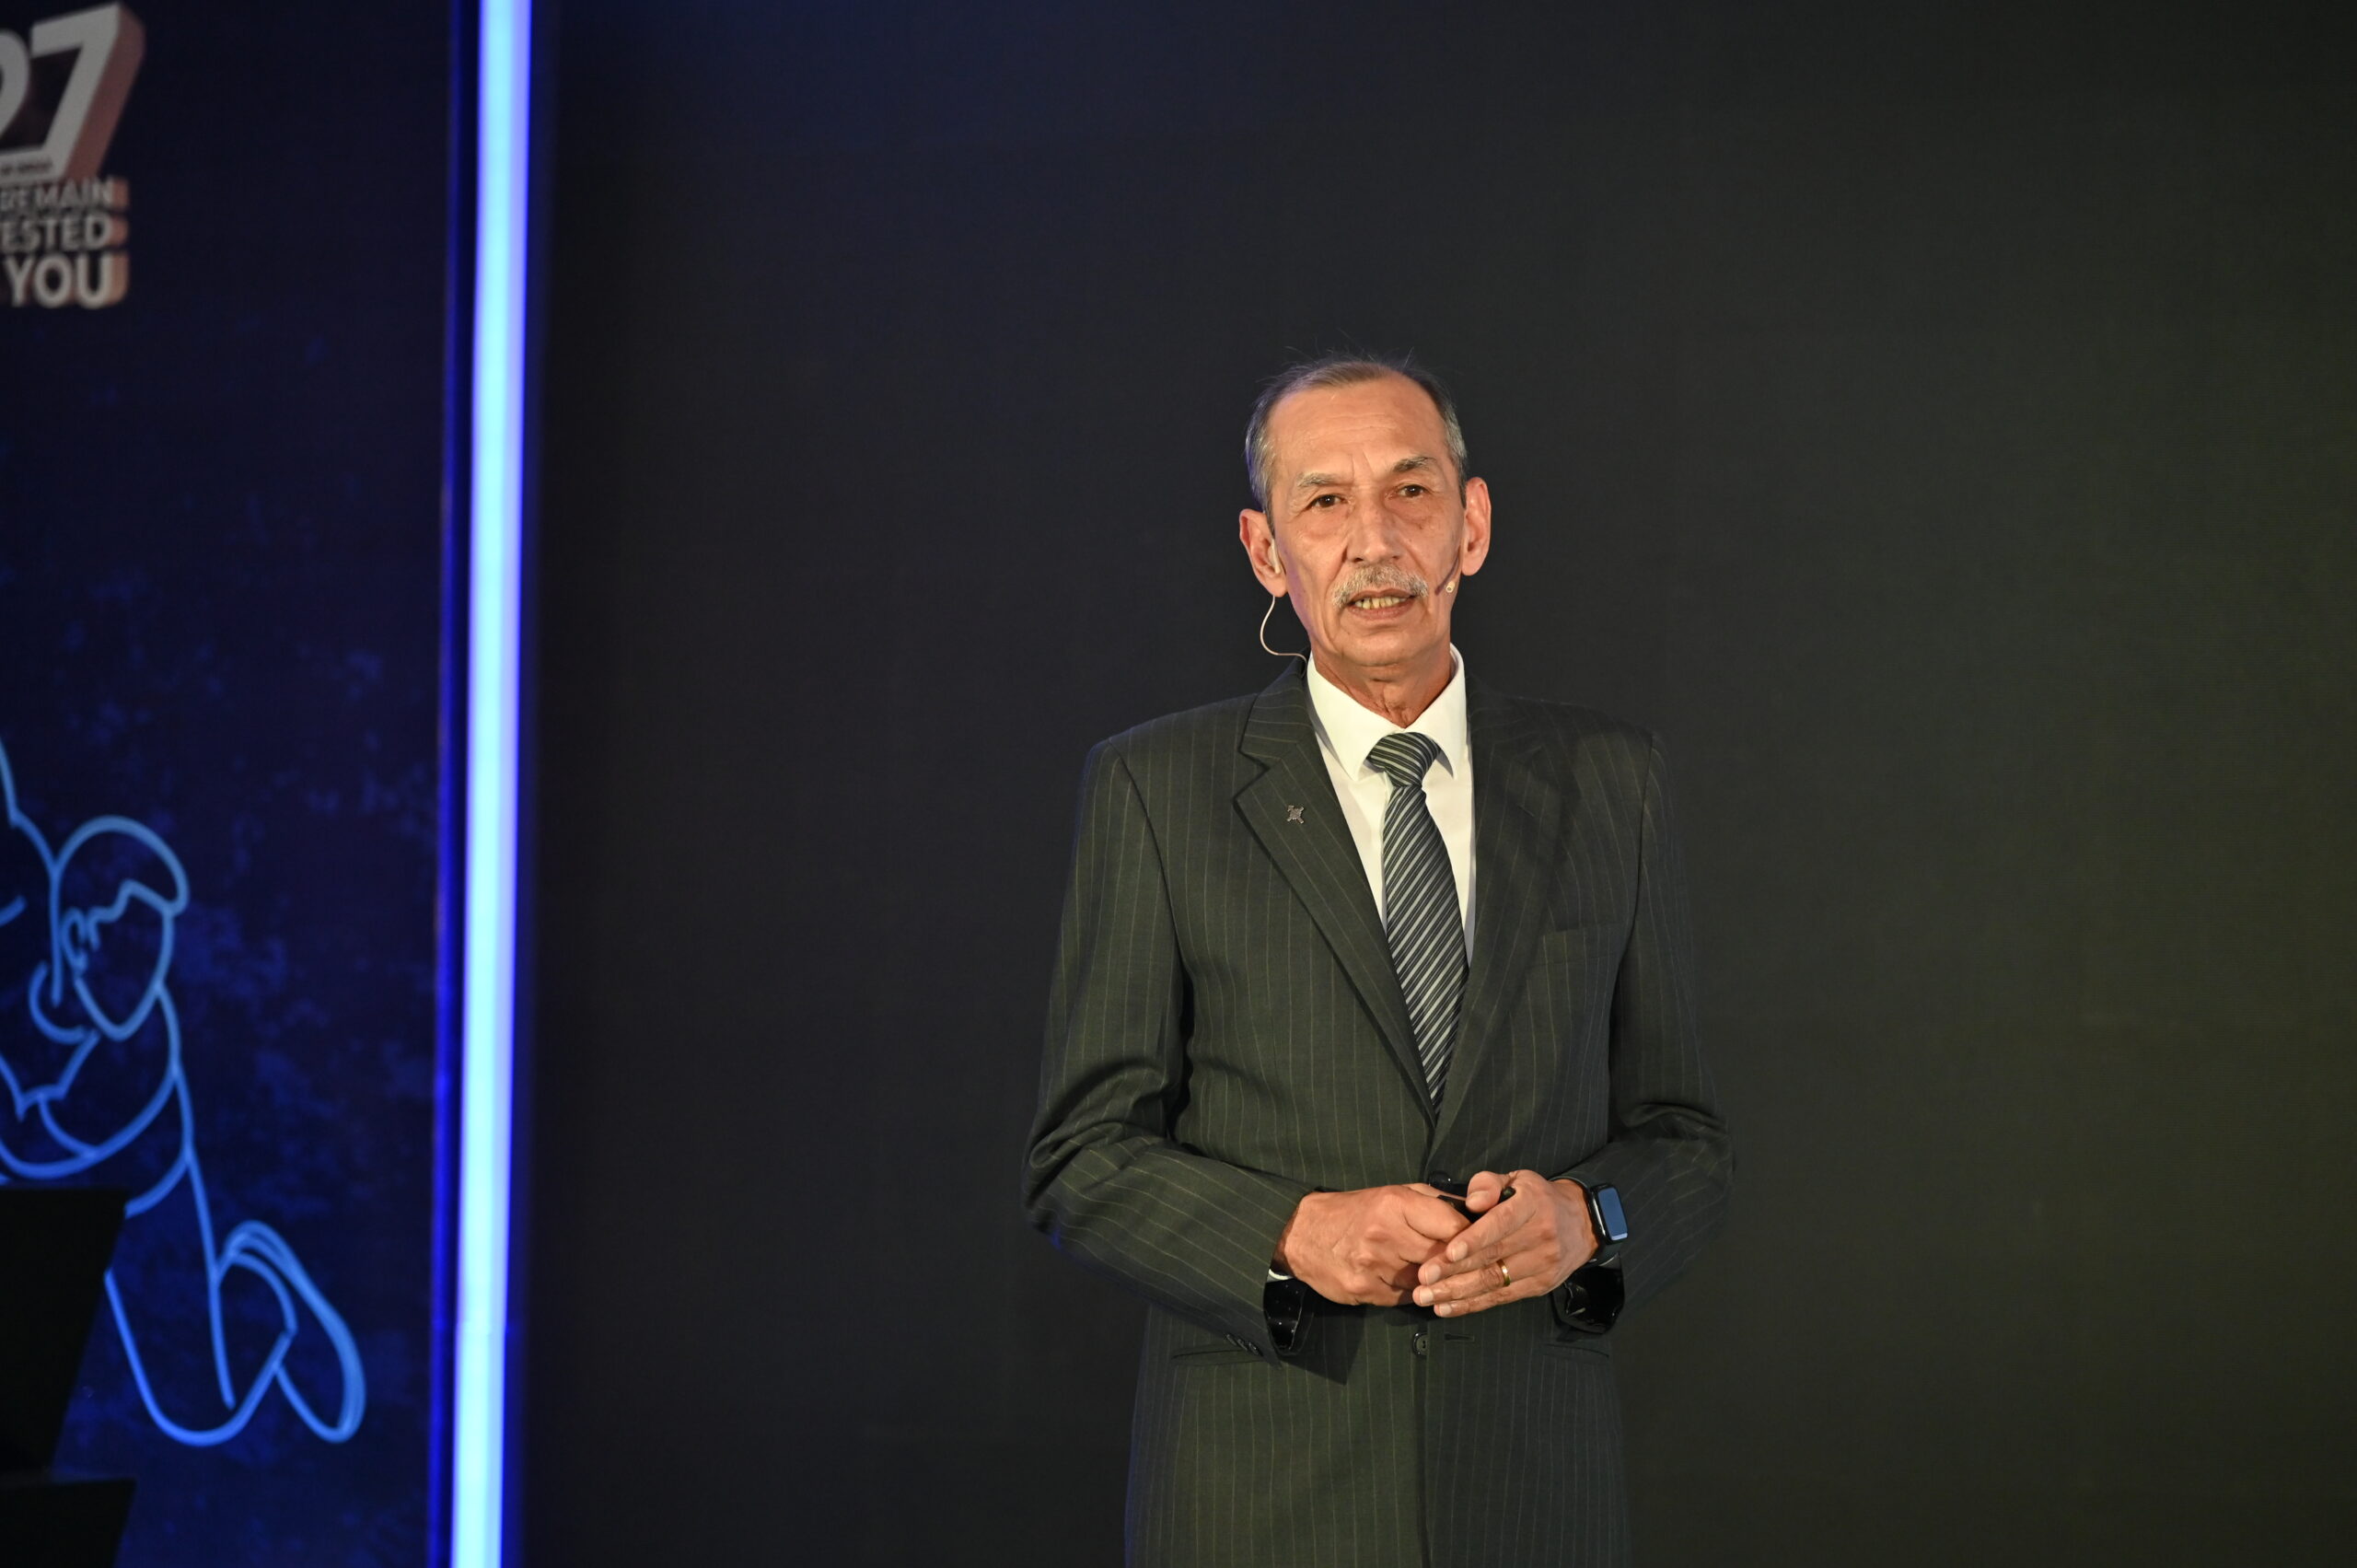 Gen DS Hooda as a motivational speaker at a corporate event in Jaipur